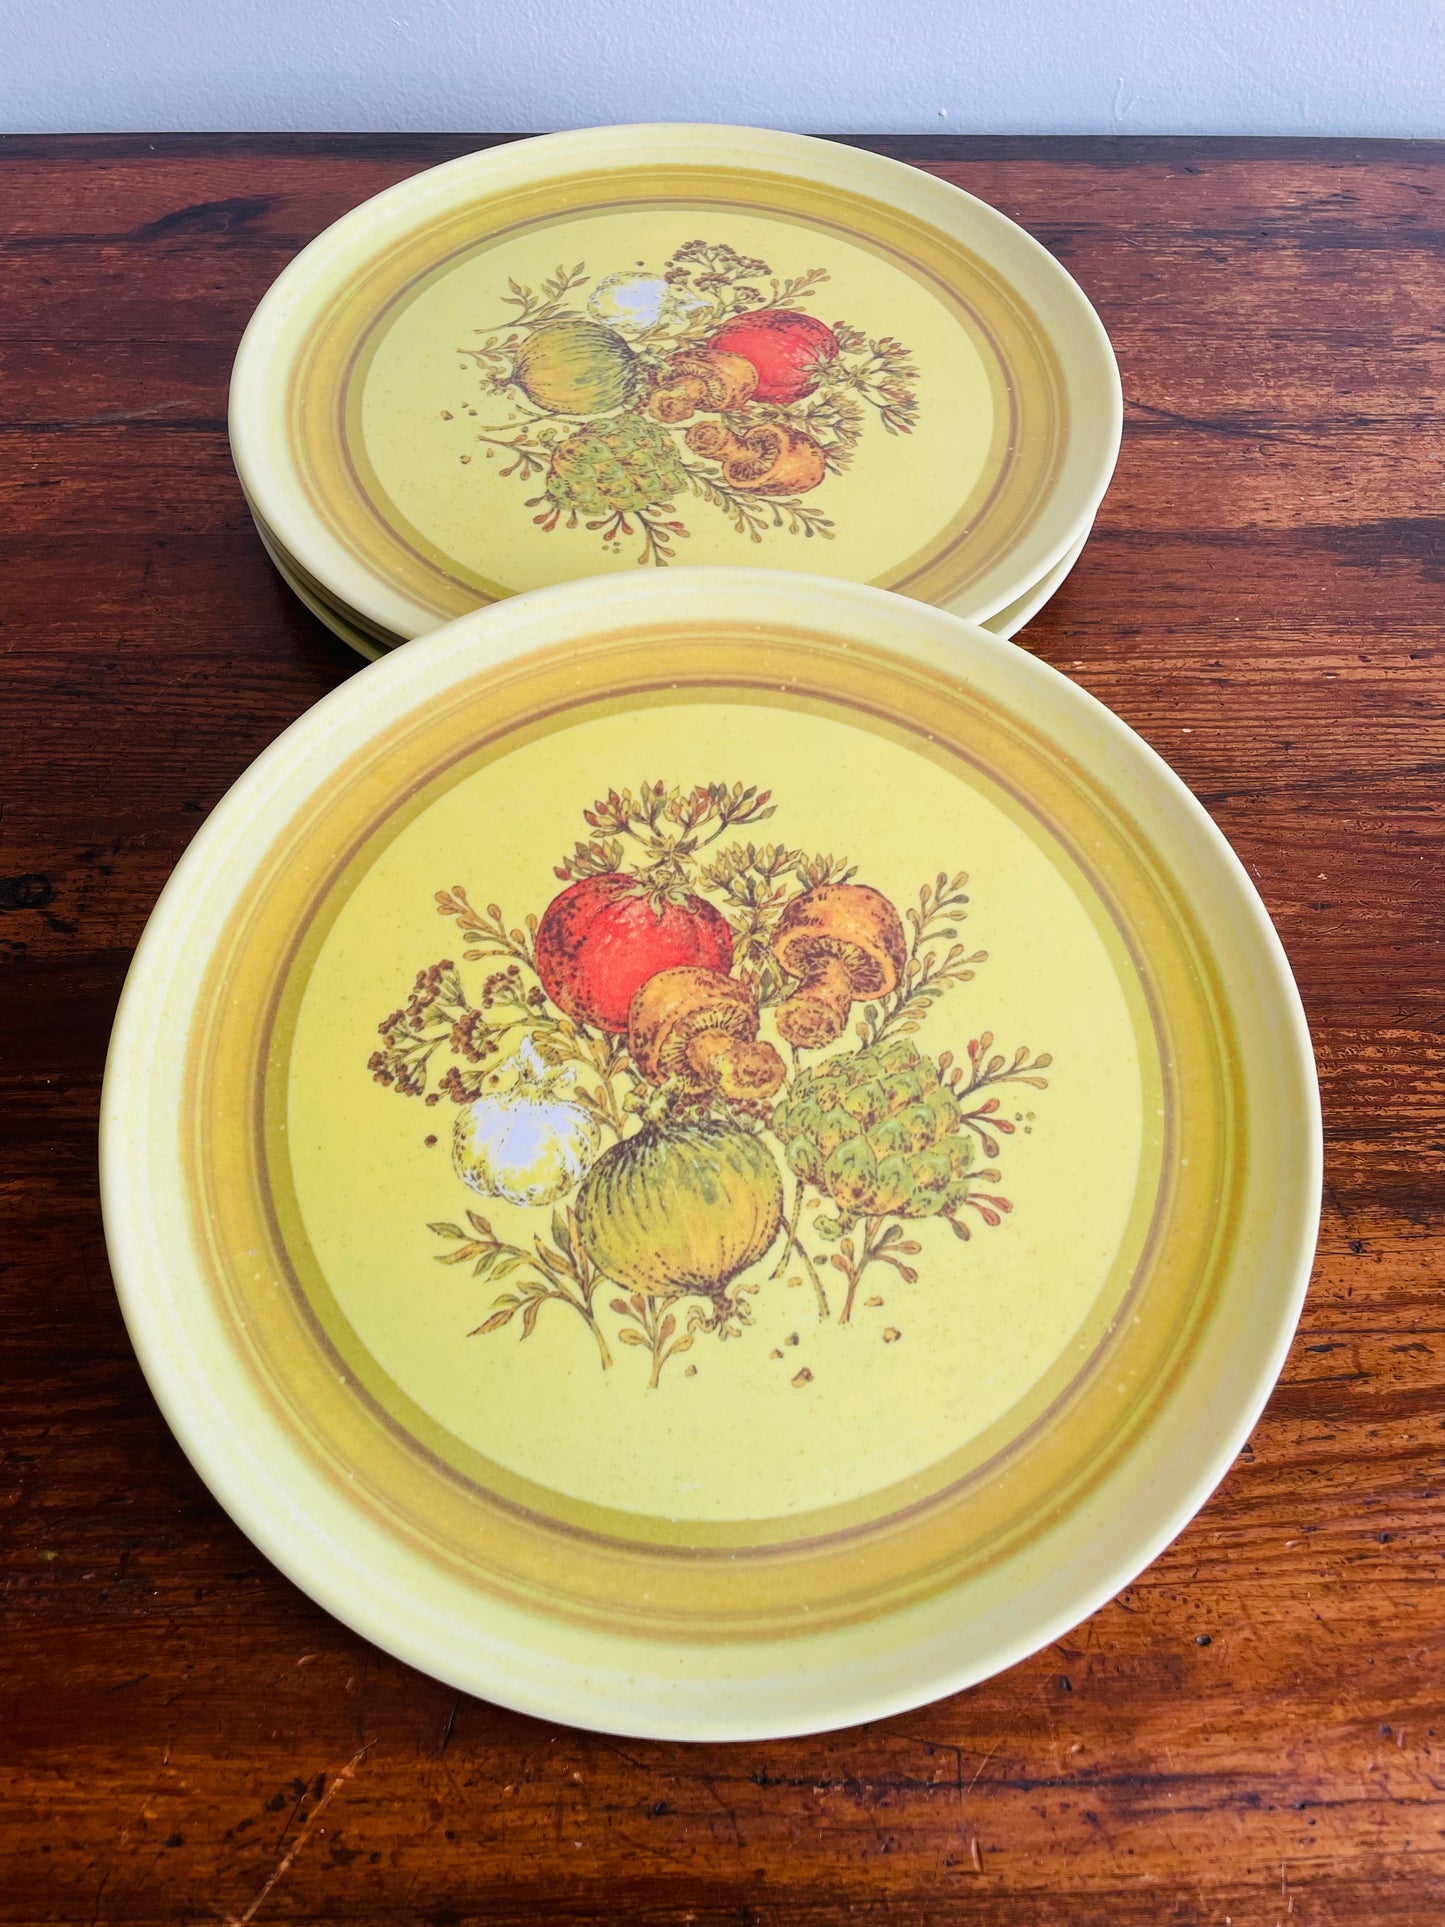 Lexington Melamine Plates with Vegetables Graphic - Set of 5 - Made in USA